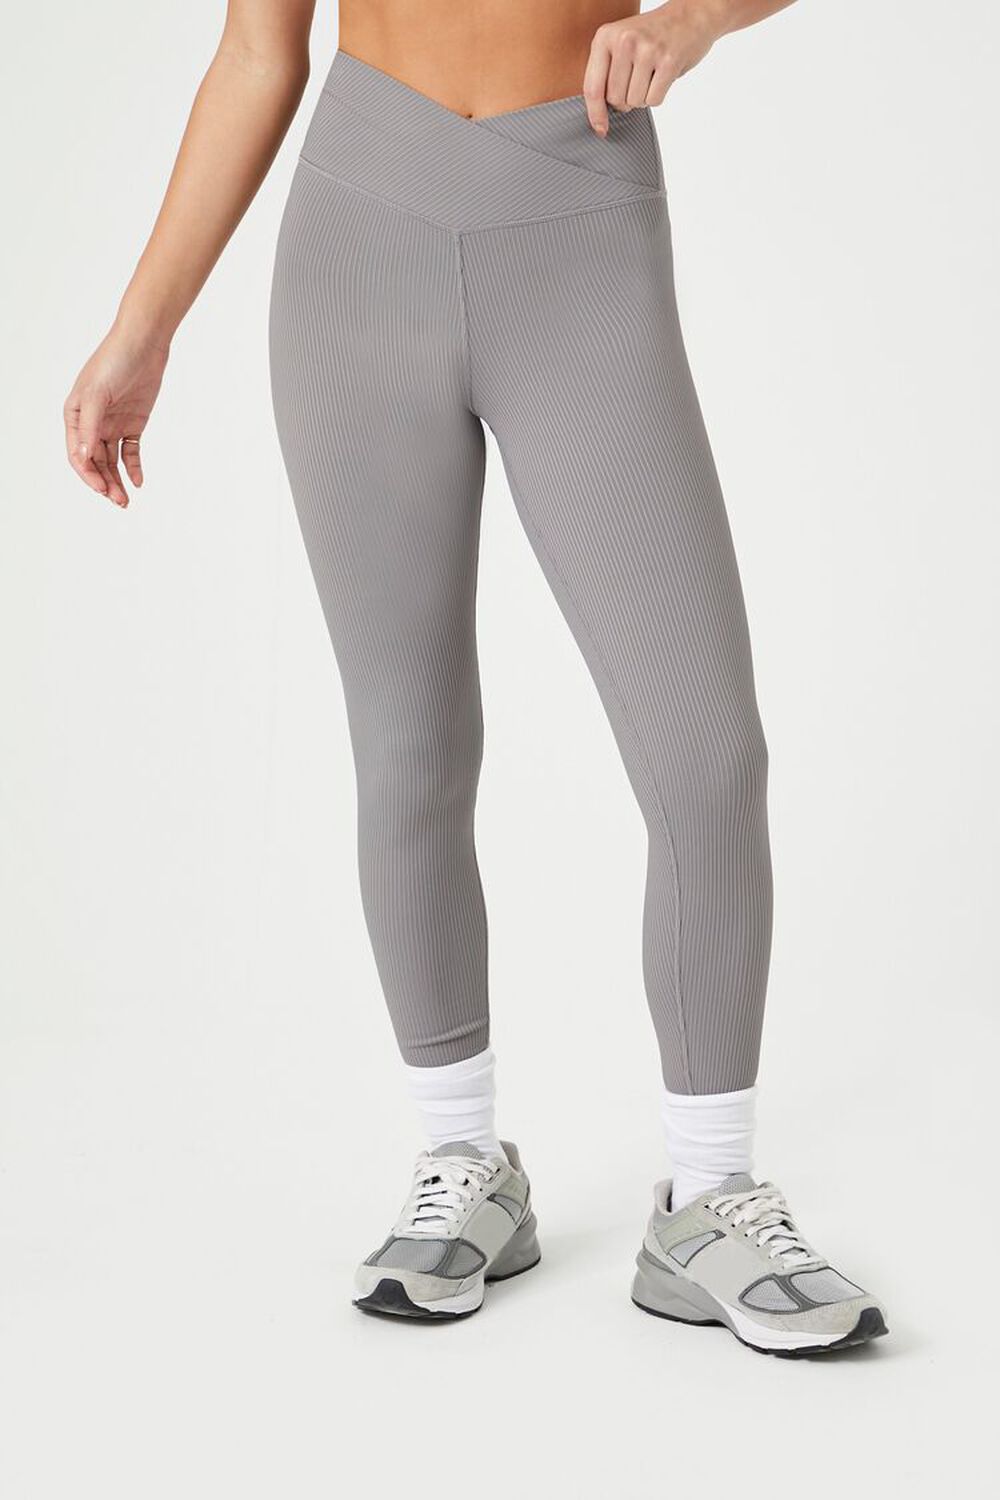 Prismatic One More Rep Leggings Grey - AmrapPro